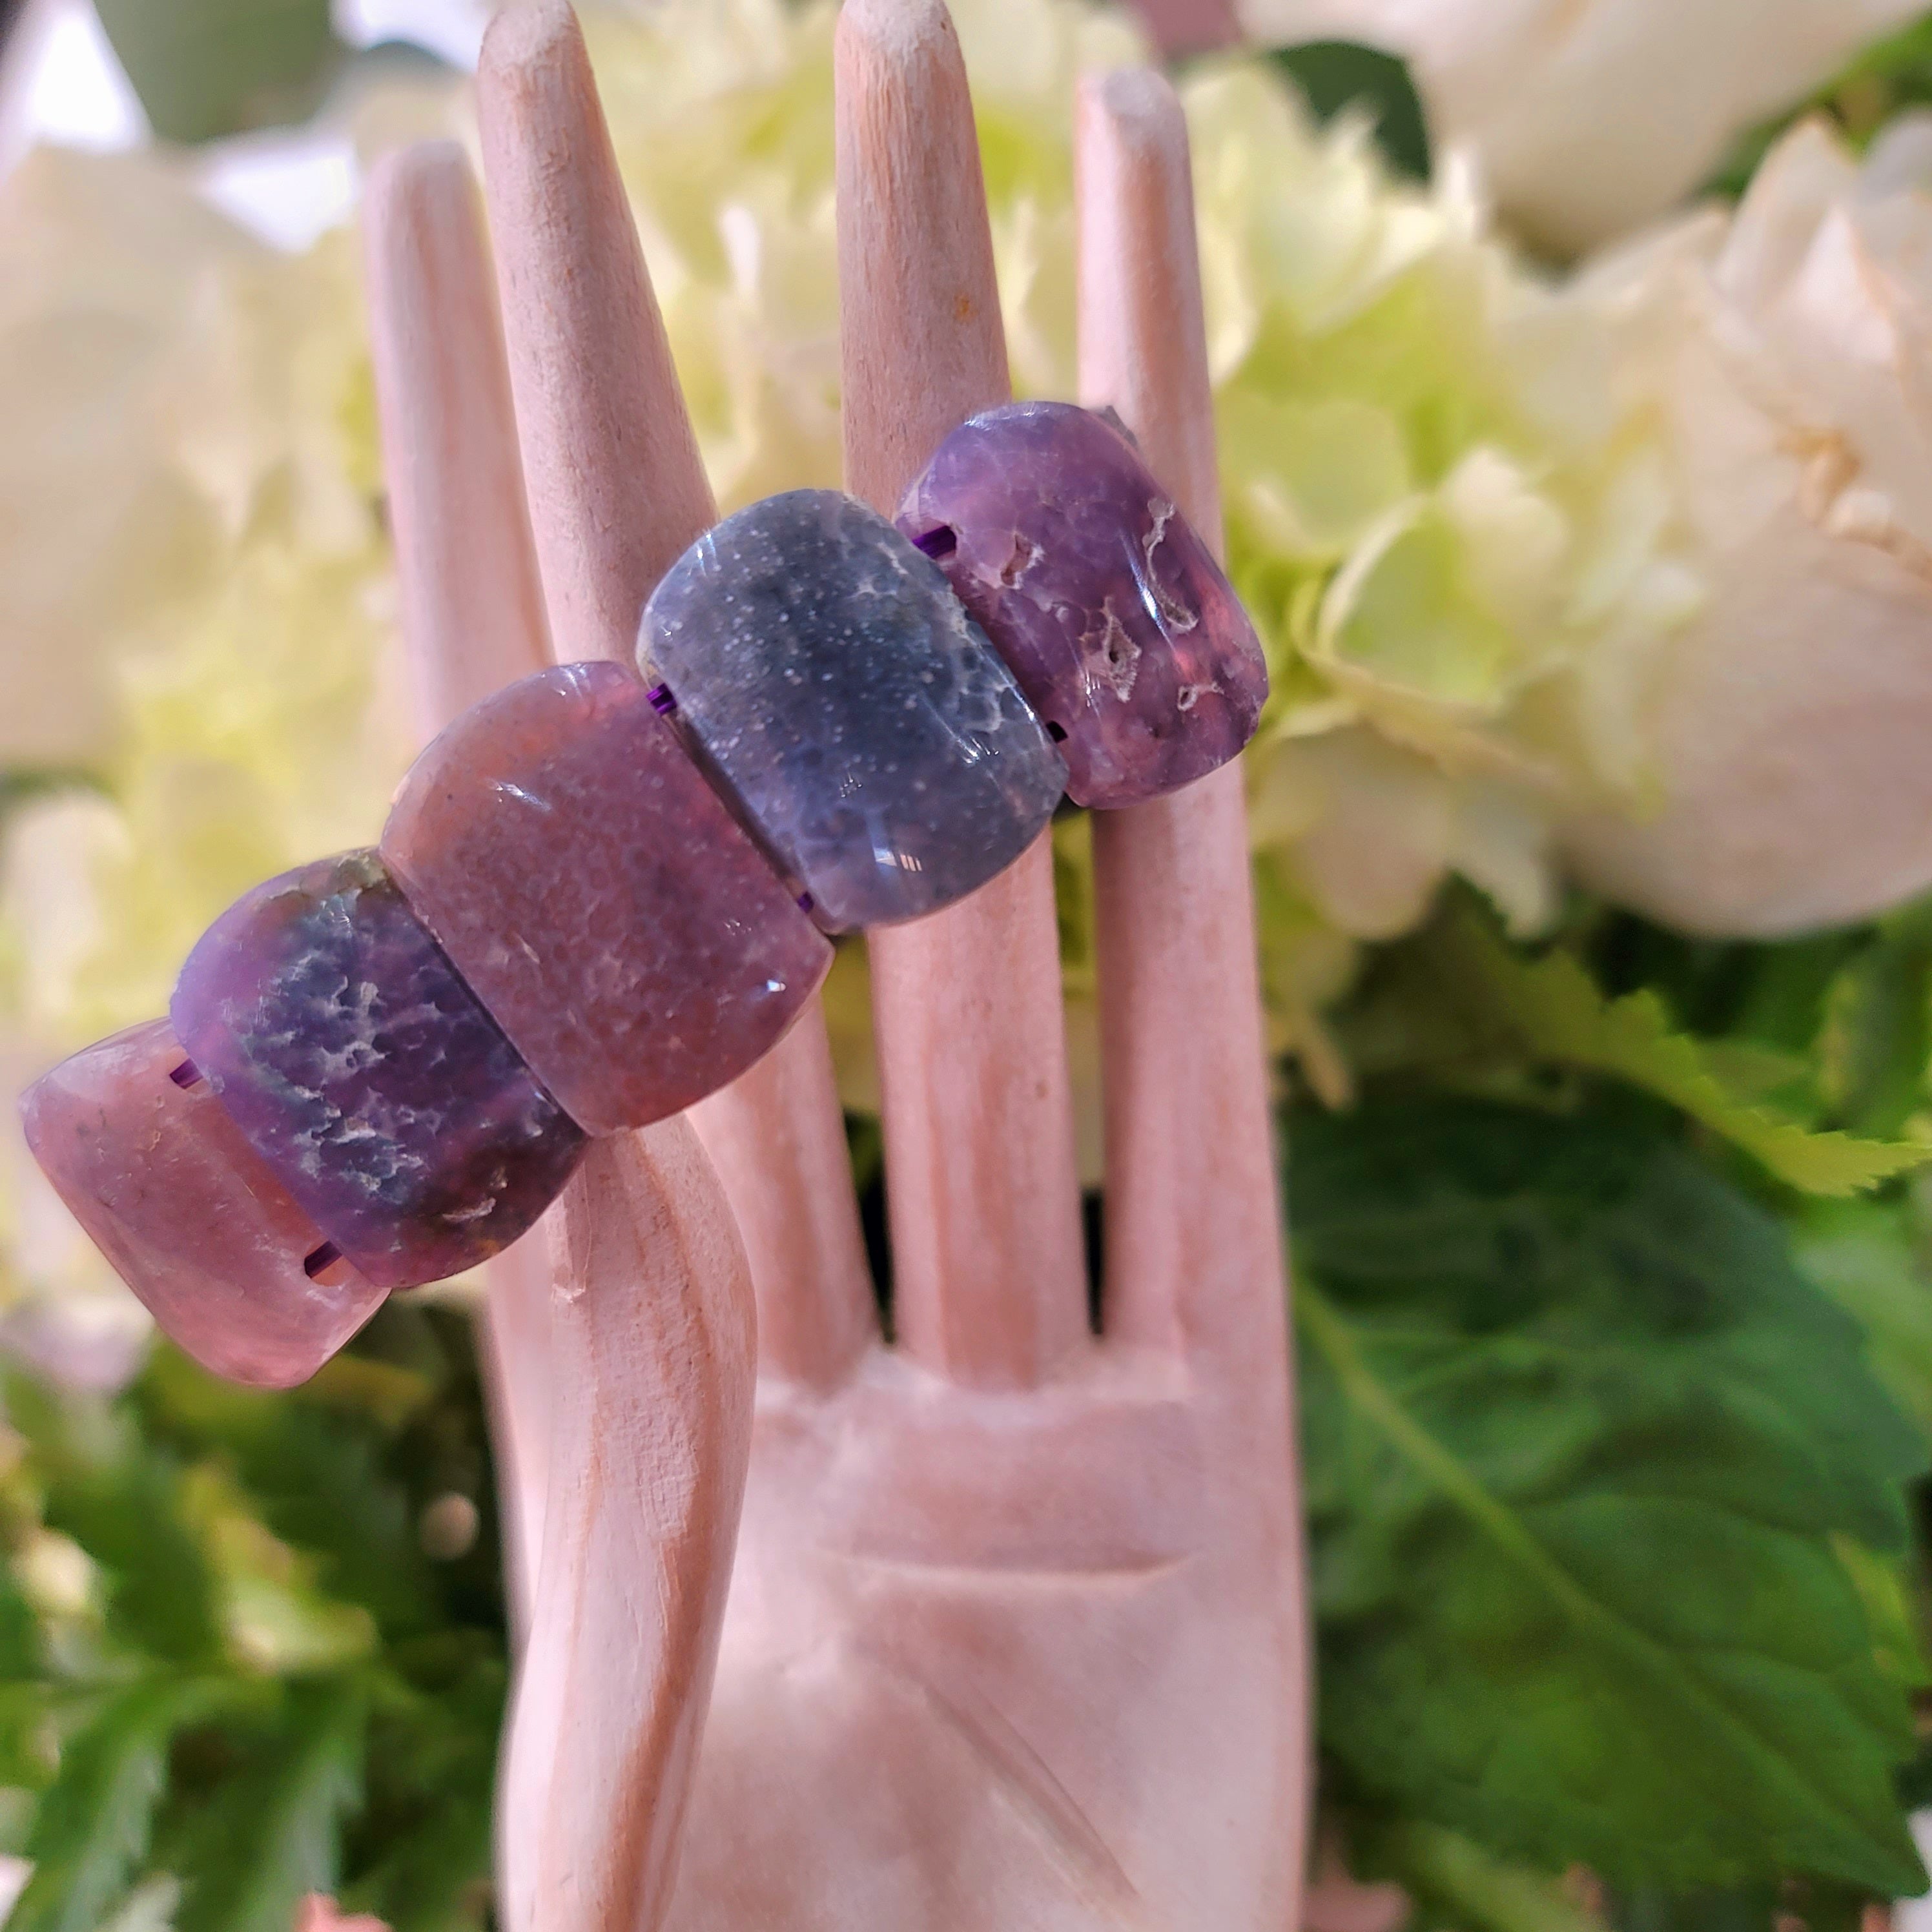 Grape Agate Stretchy Bangle Bracelet (AAA Grade) for Connecting with your Higher Self and Attracting your Soul Mate